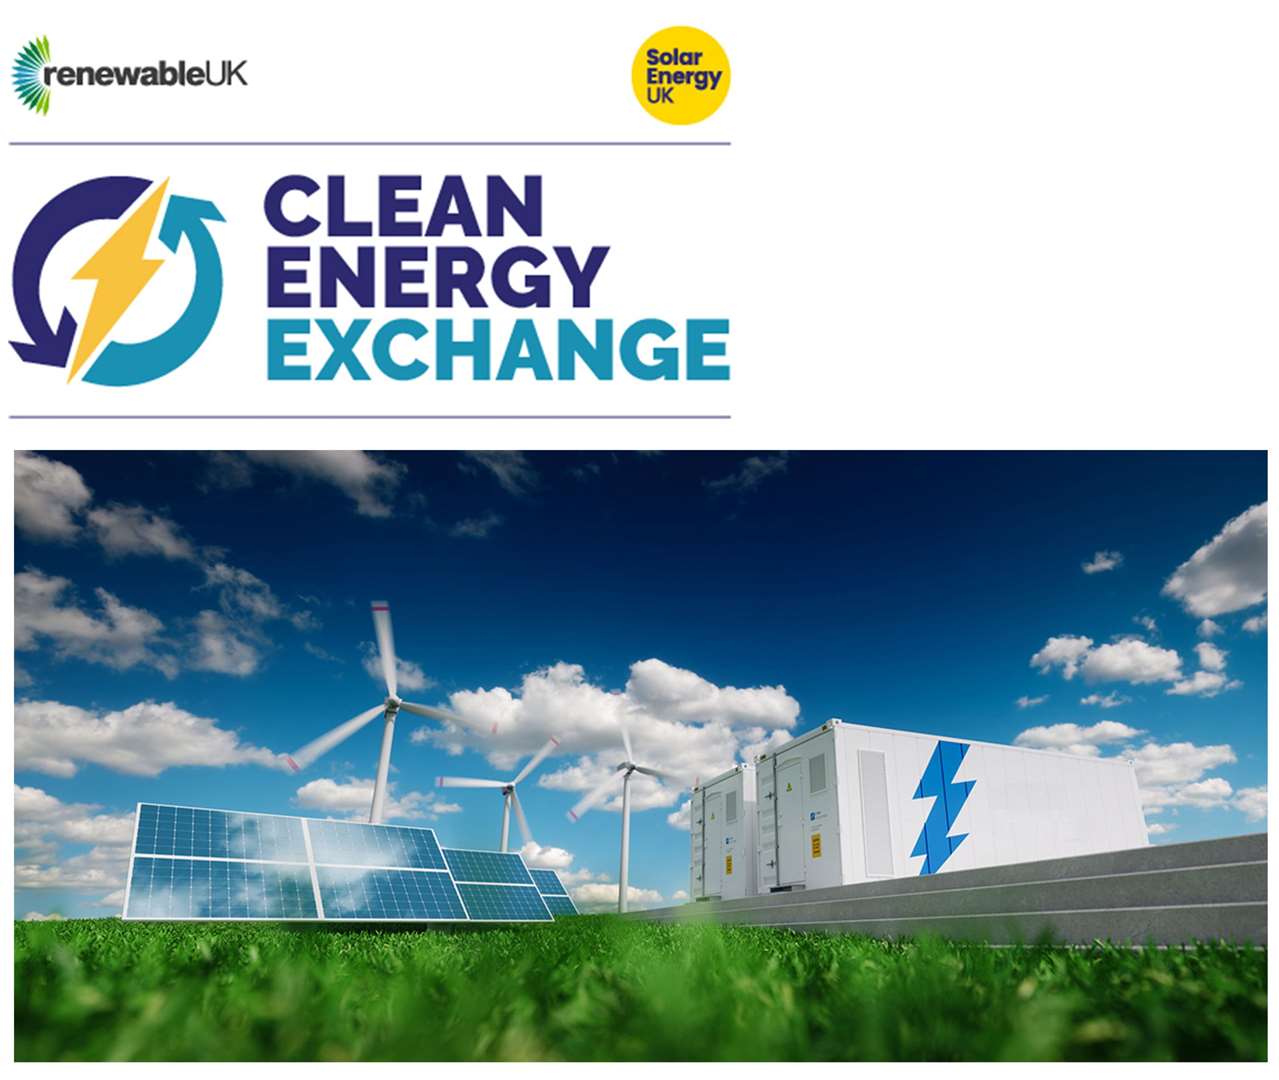 Clean Energy Exechange is just one of the webinar series from RenewableUK over the coming months.